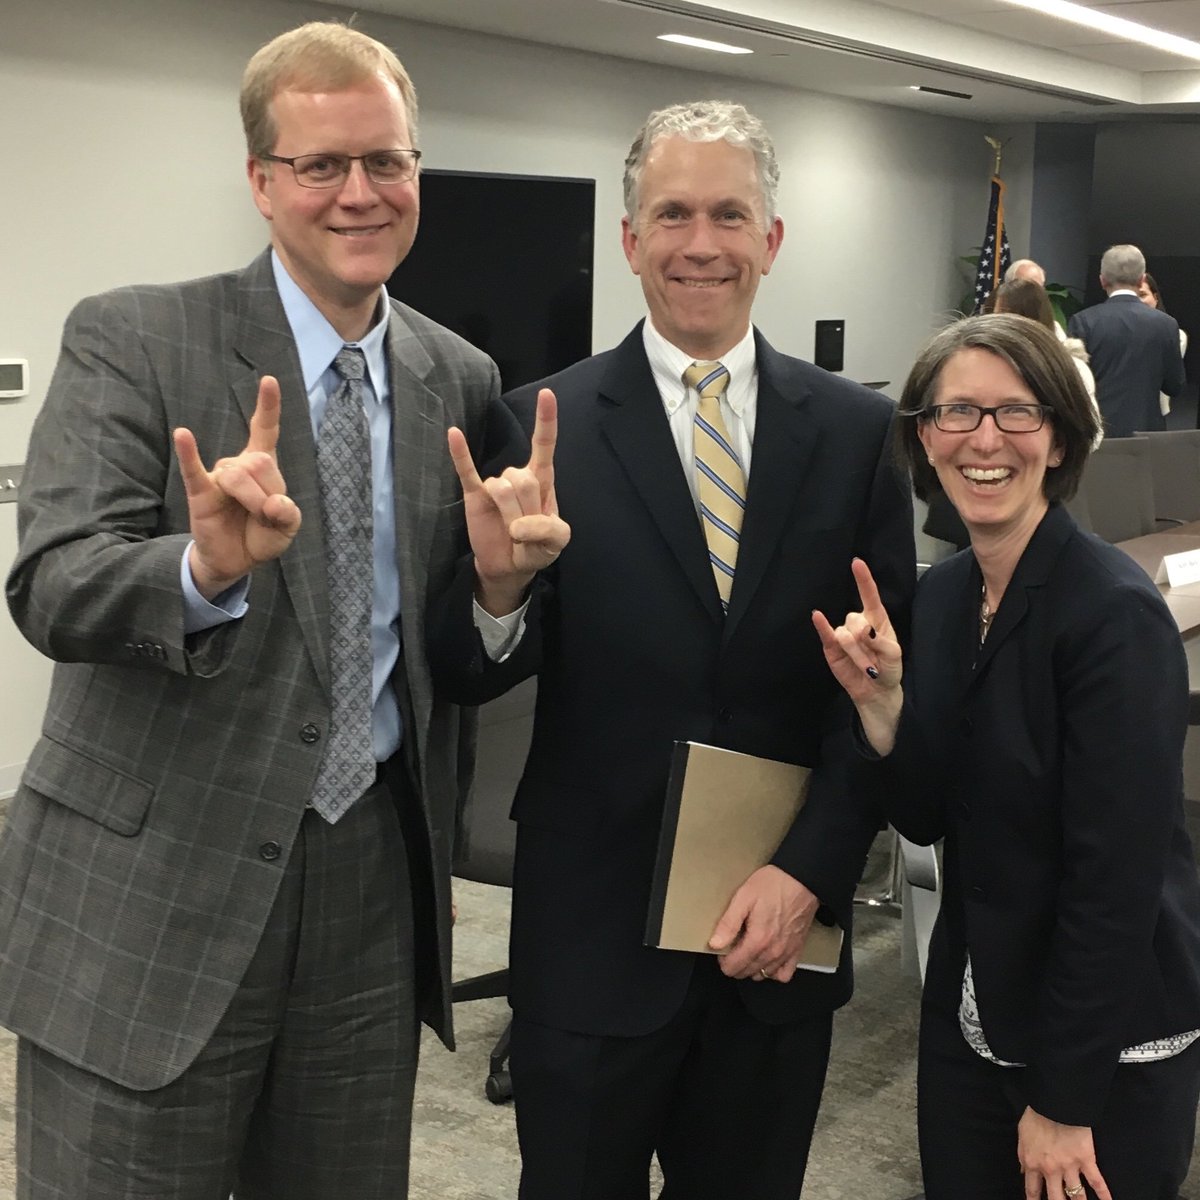 Brent Riddle (MPAff '98), Wyatt Shields (MPAff '98) and Wendy Block Sanford (MPAff '01) at a regional transportation meeting in Northern Virginia